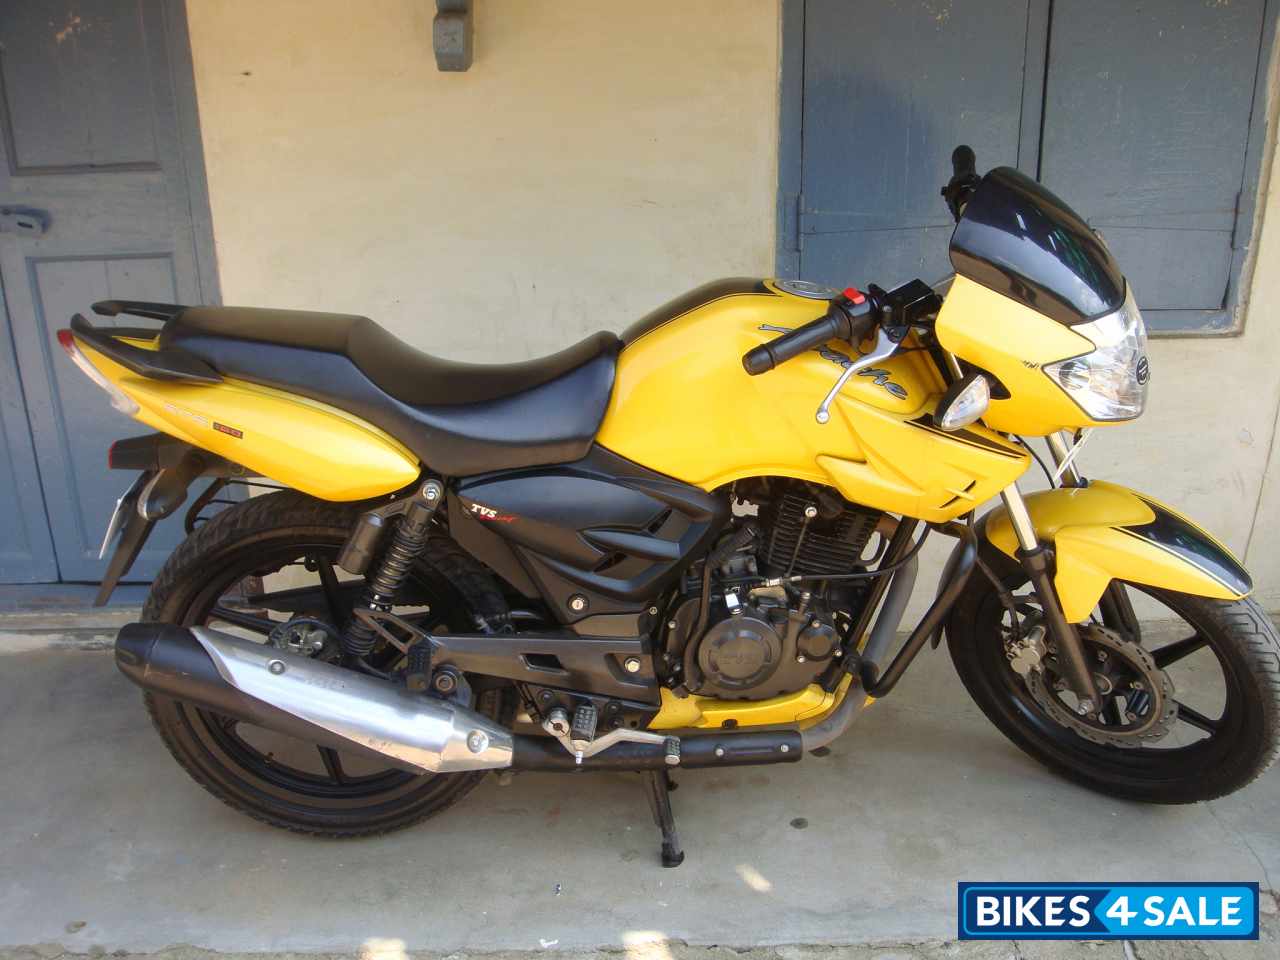 Used 2009 model TVS Apache RTR 160 for sale in Chennai. ID ...